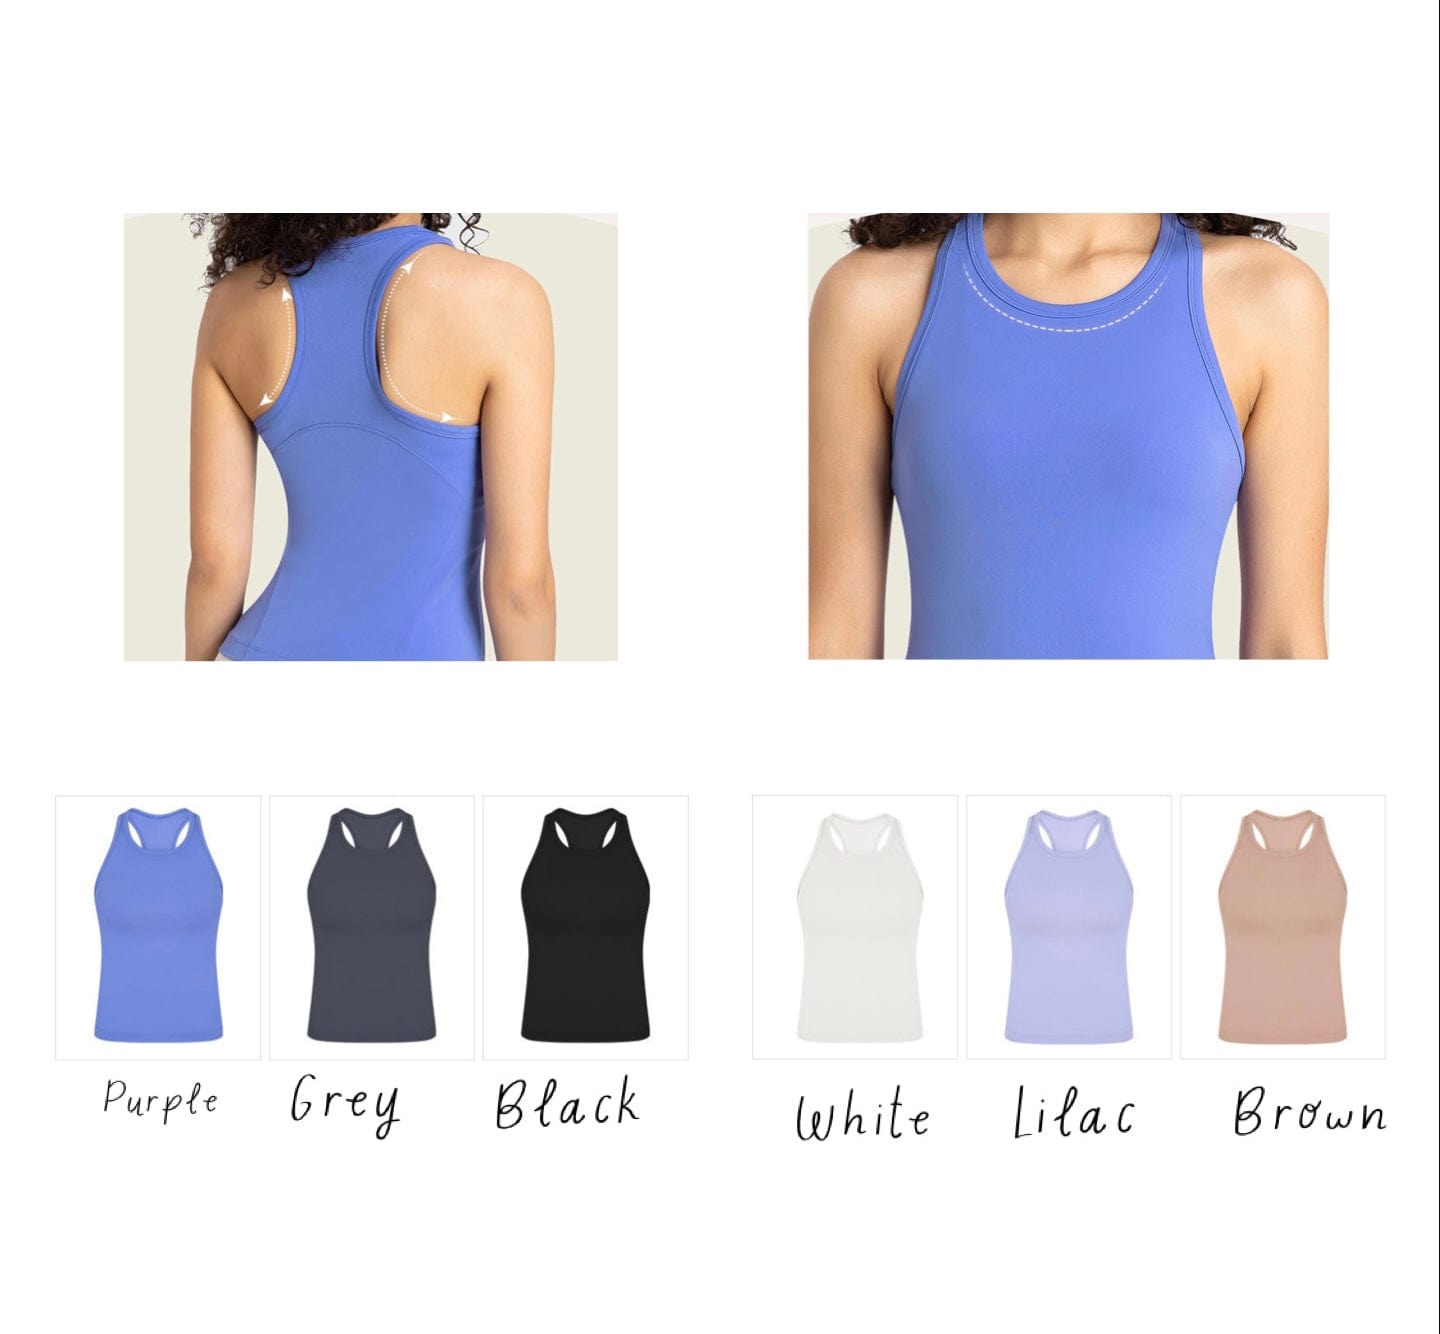 Everyday high neck tank top (longer version) - this is not padded